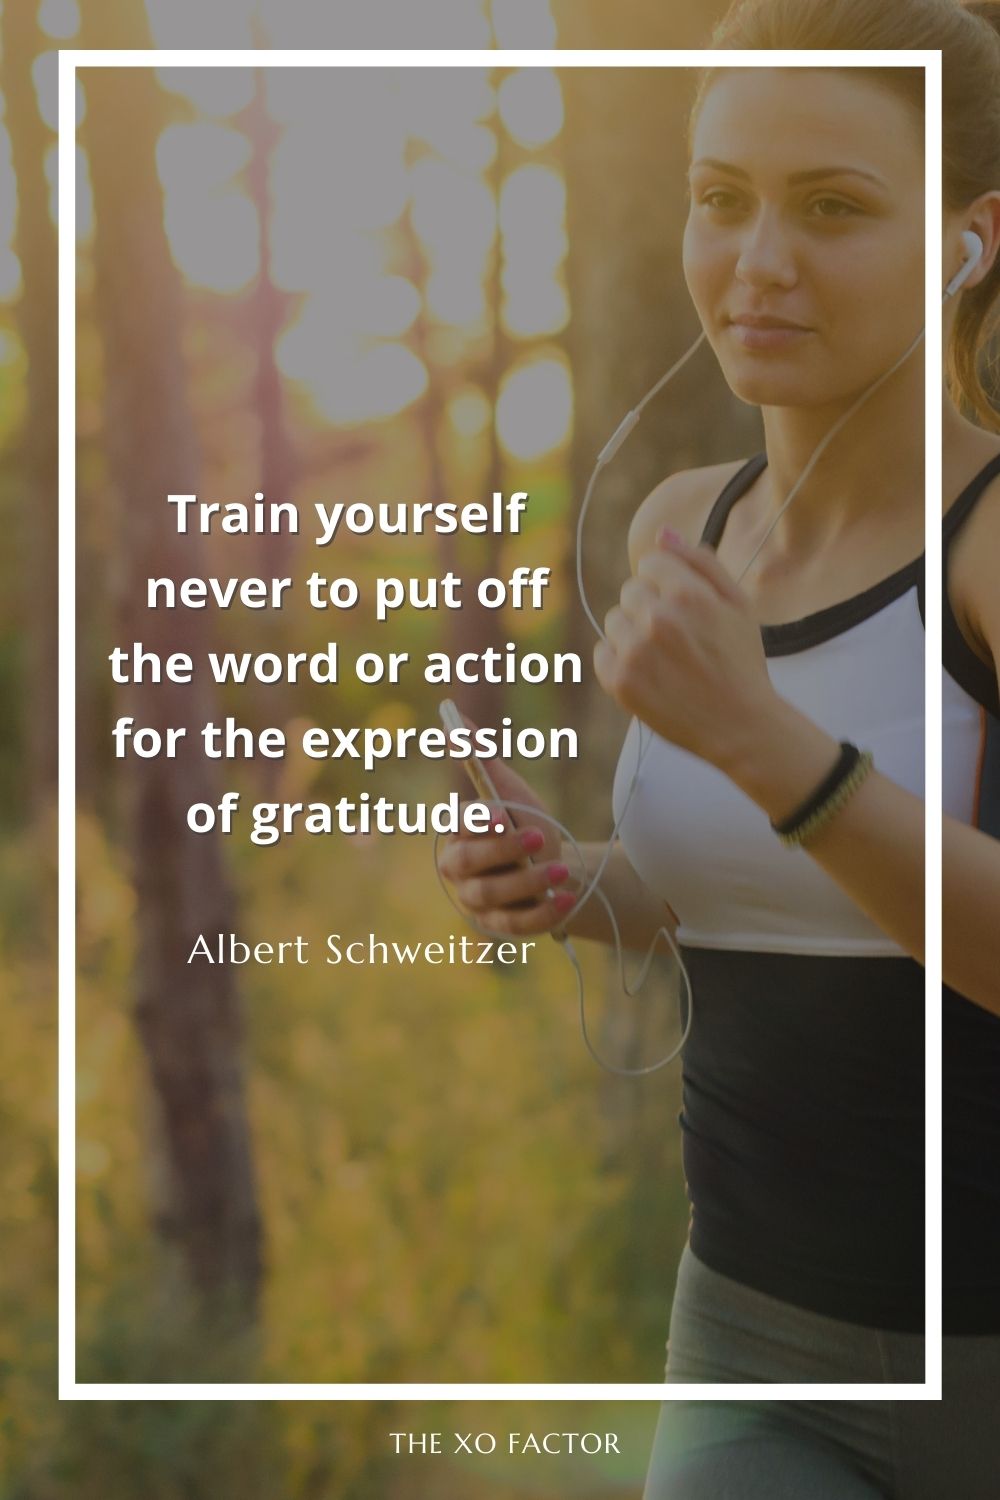 Train yourself never to put off the word or action for the expression of gratitude.